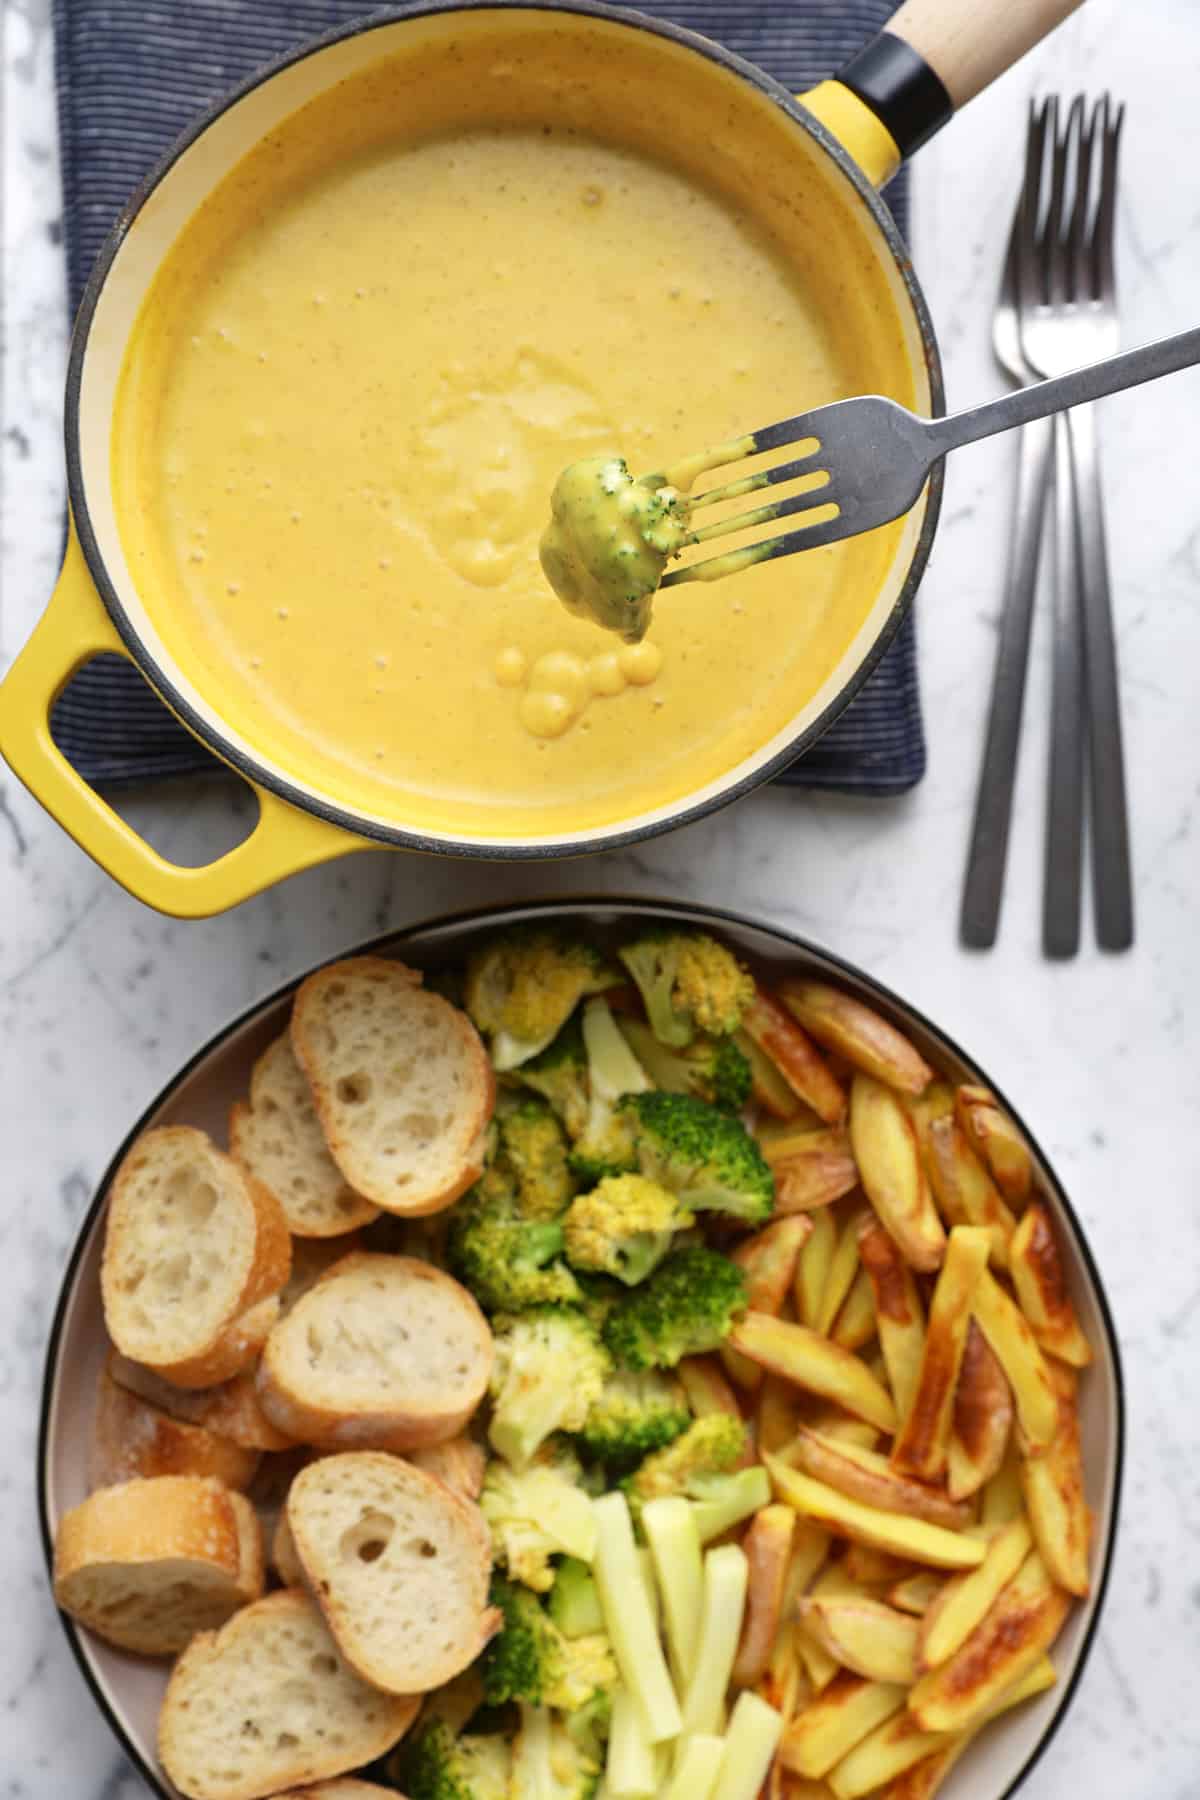 Roasted broccoli dipped into vegan fondue with a fork.